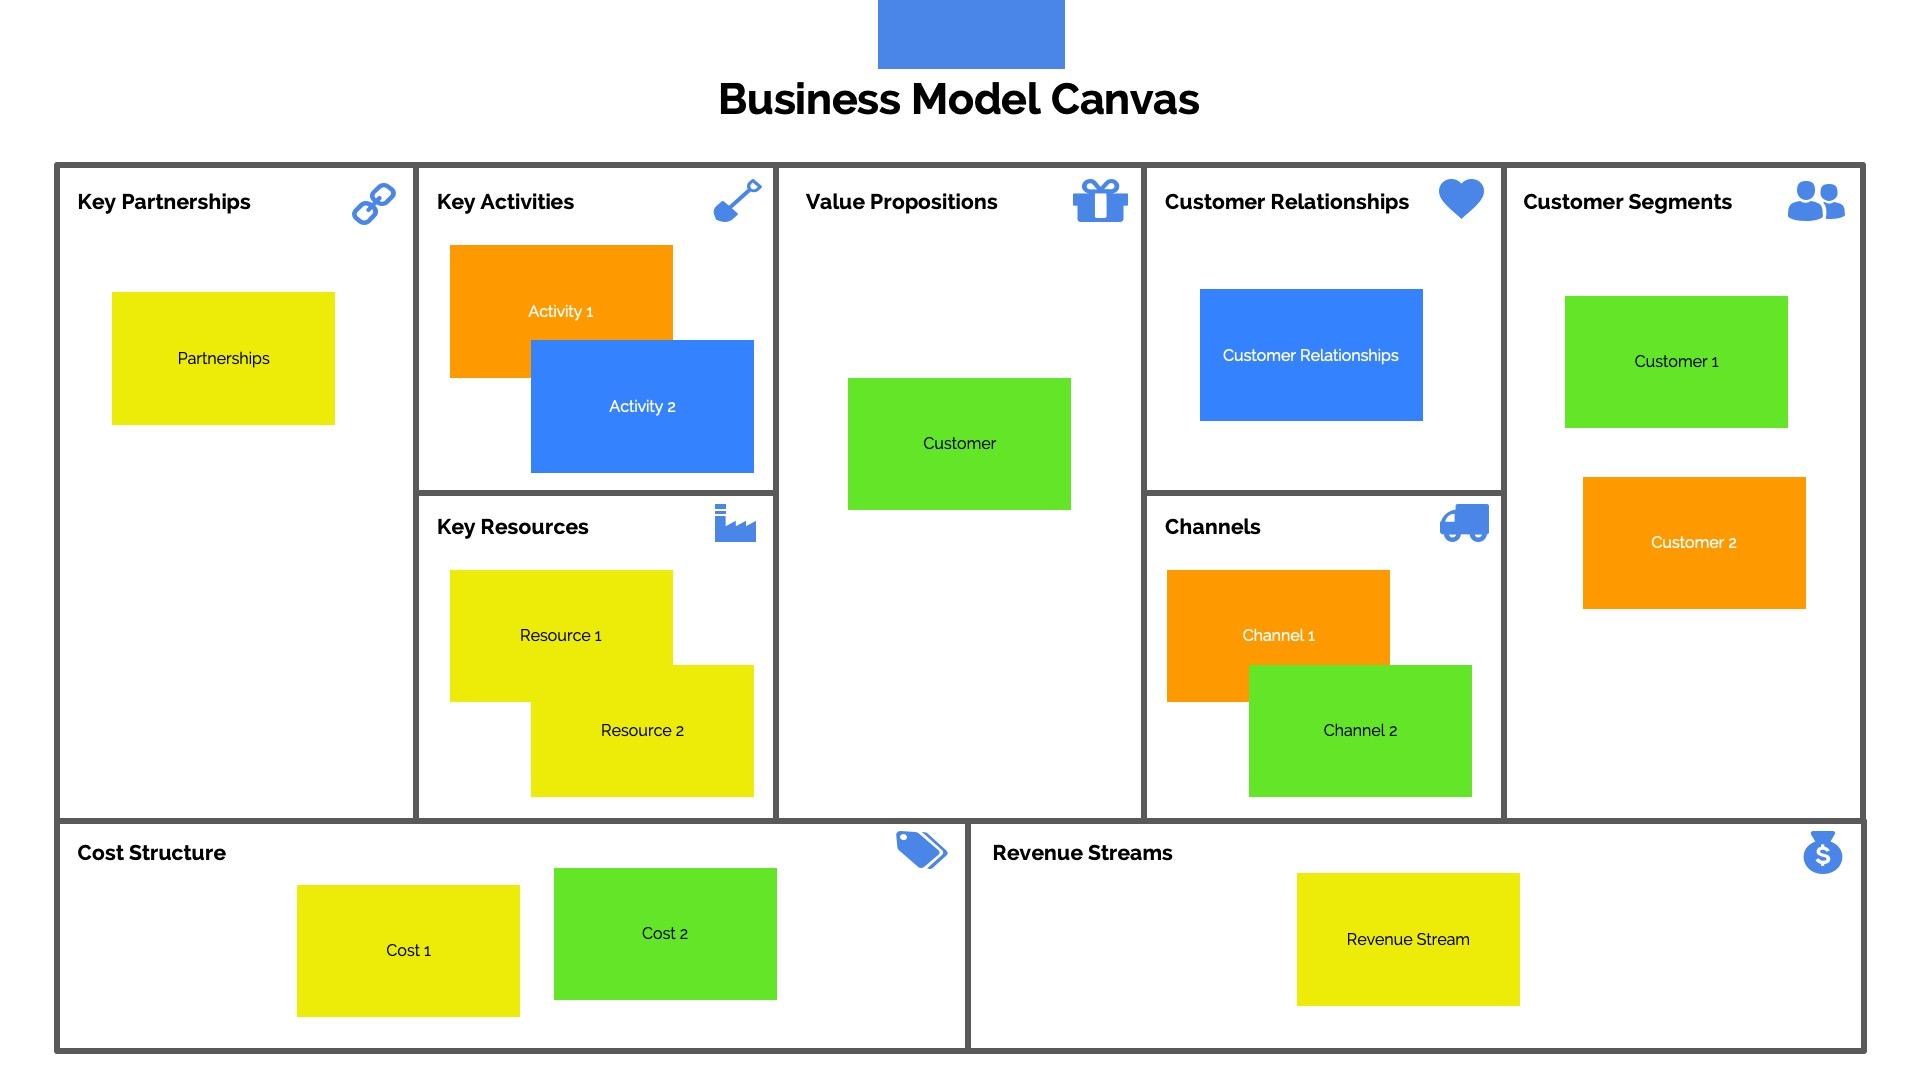 Business Model Canvas Template Ppt Contoh Gambar Template Images